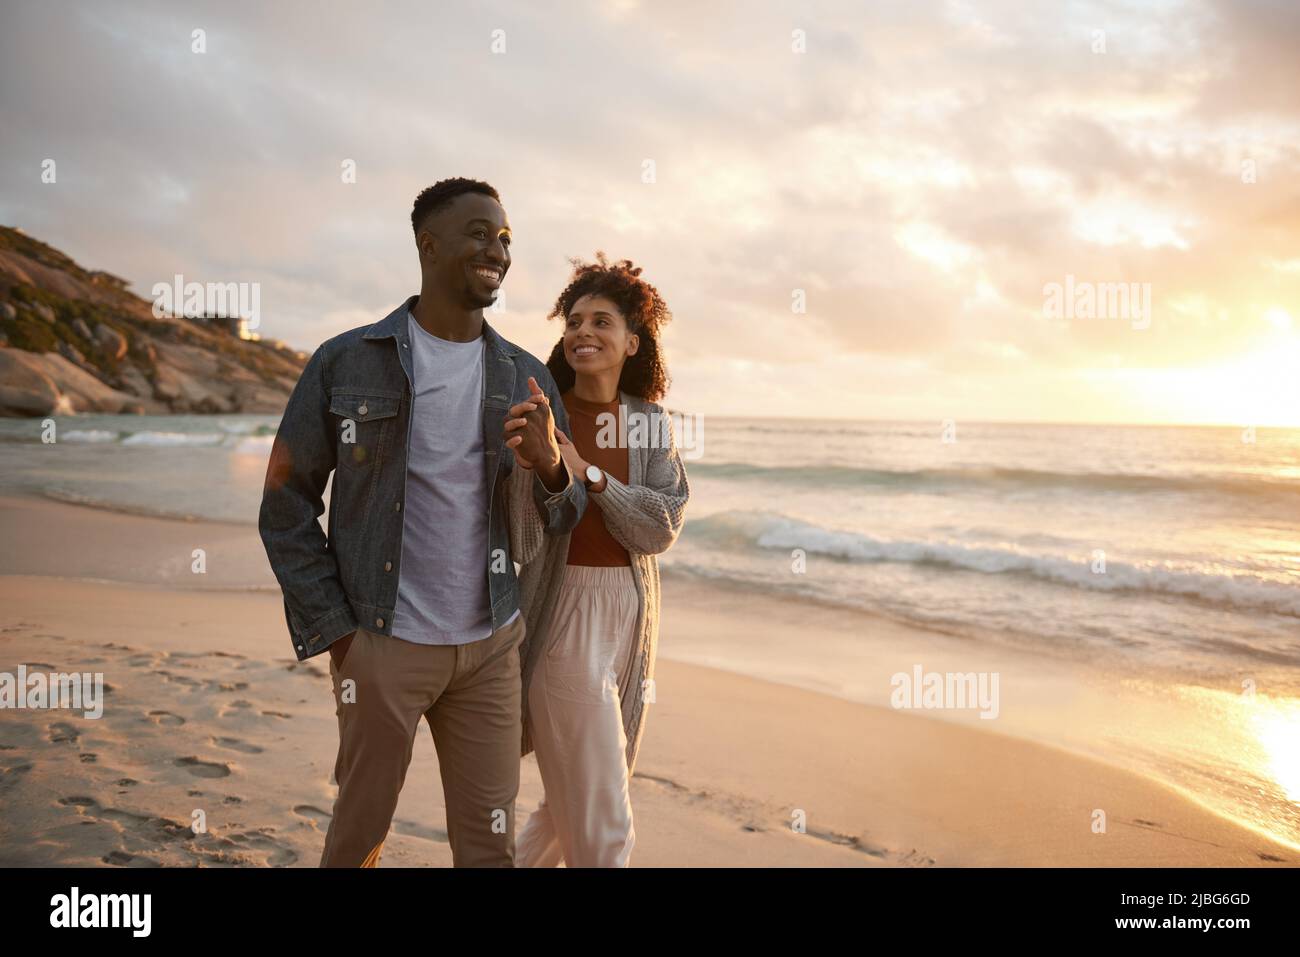 Smiling young multiethnic couple walking along a beach at sunset Stock Photo